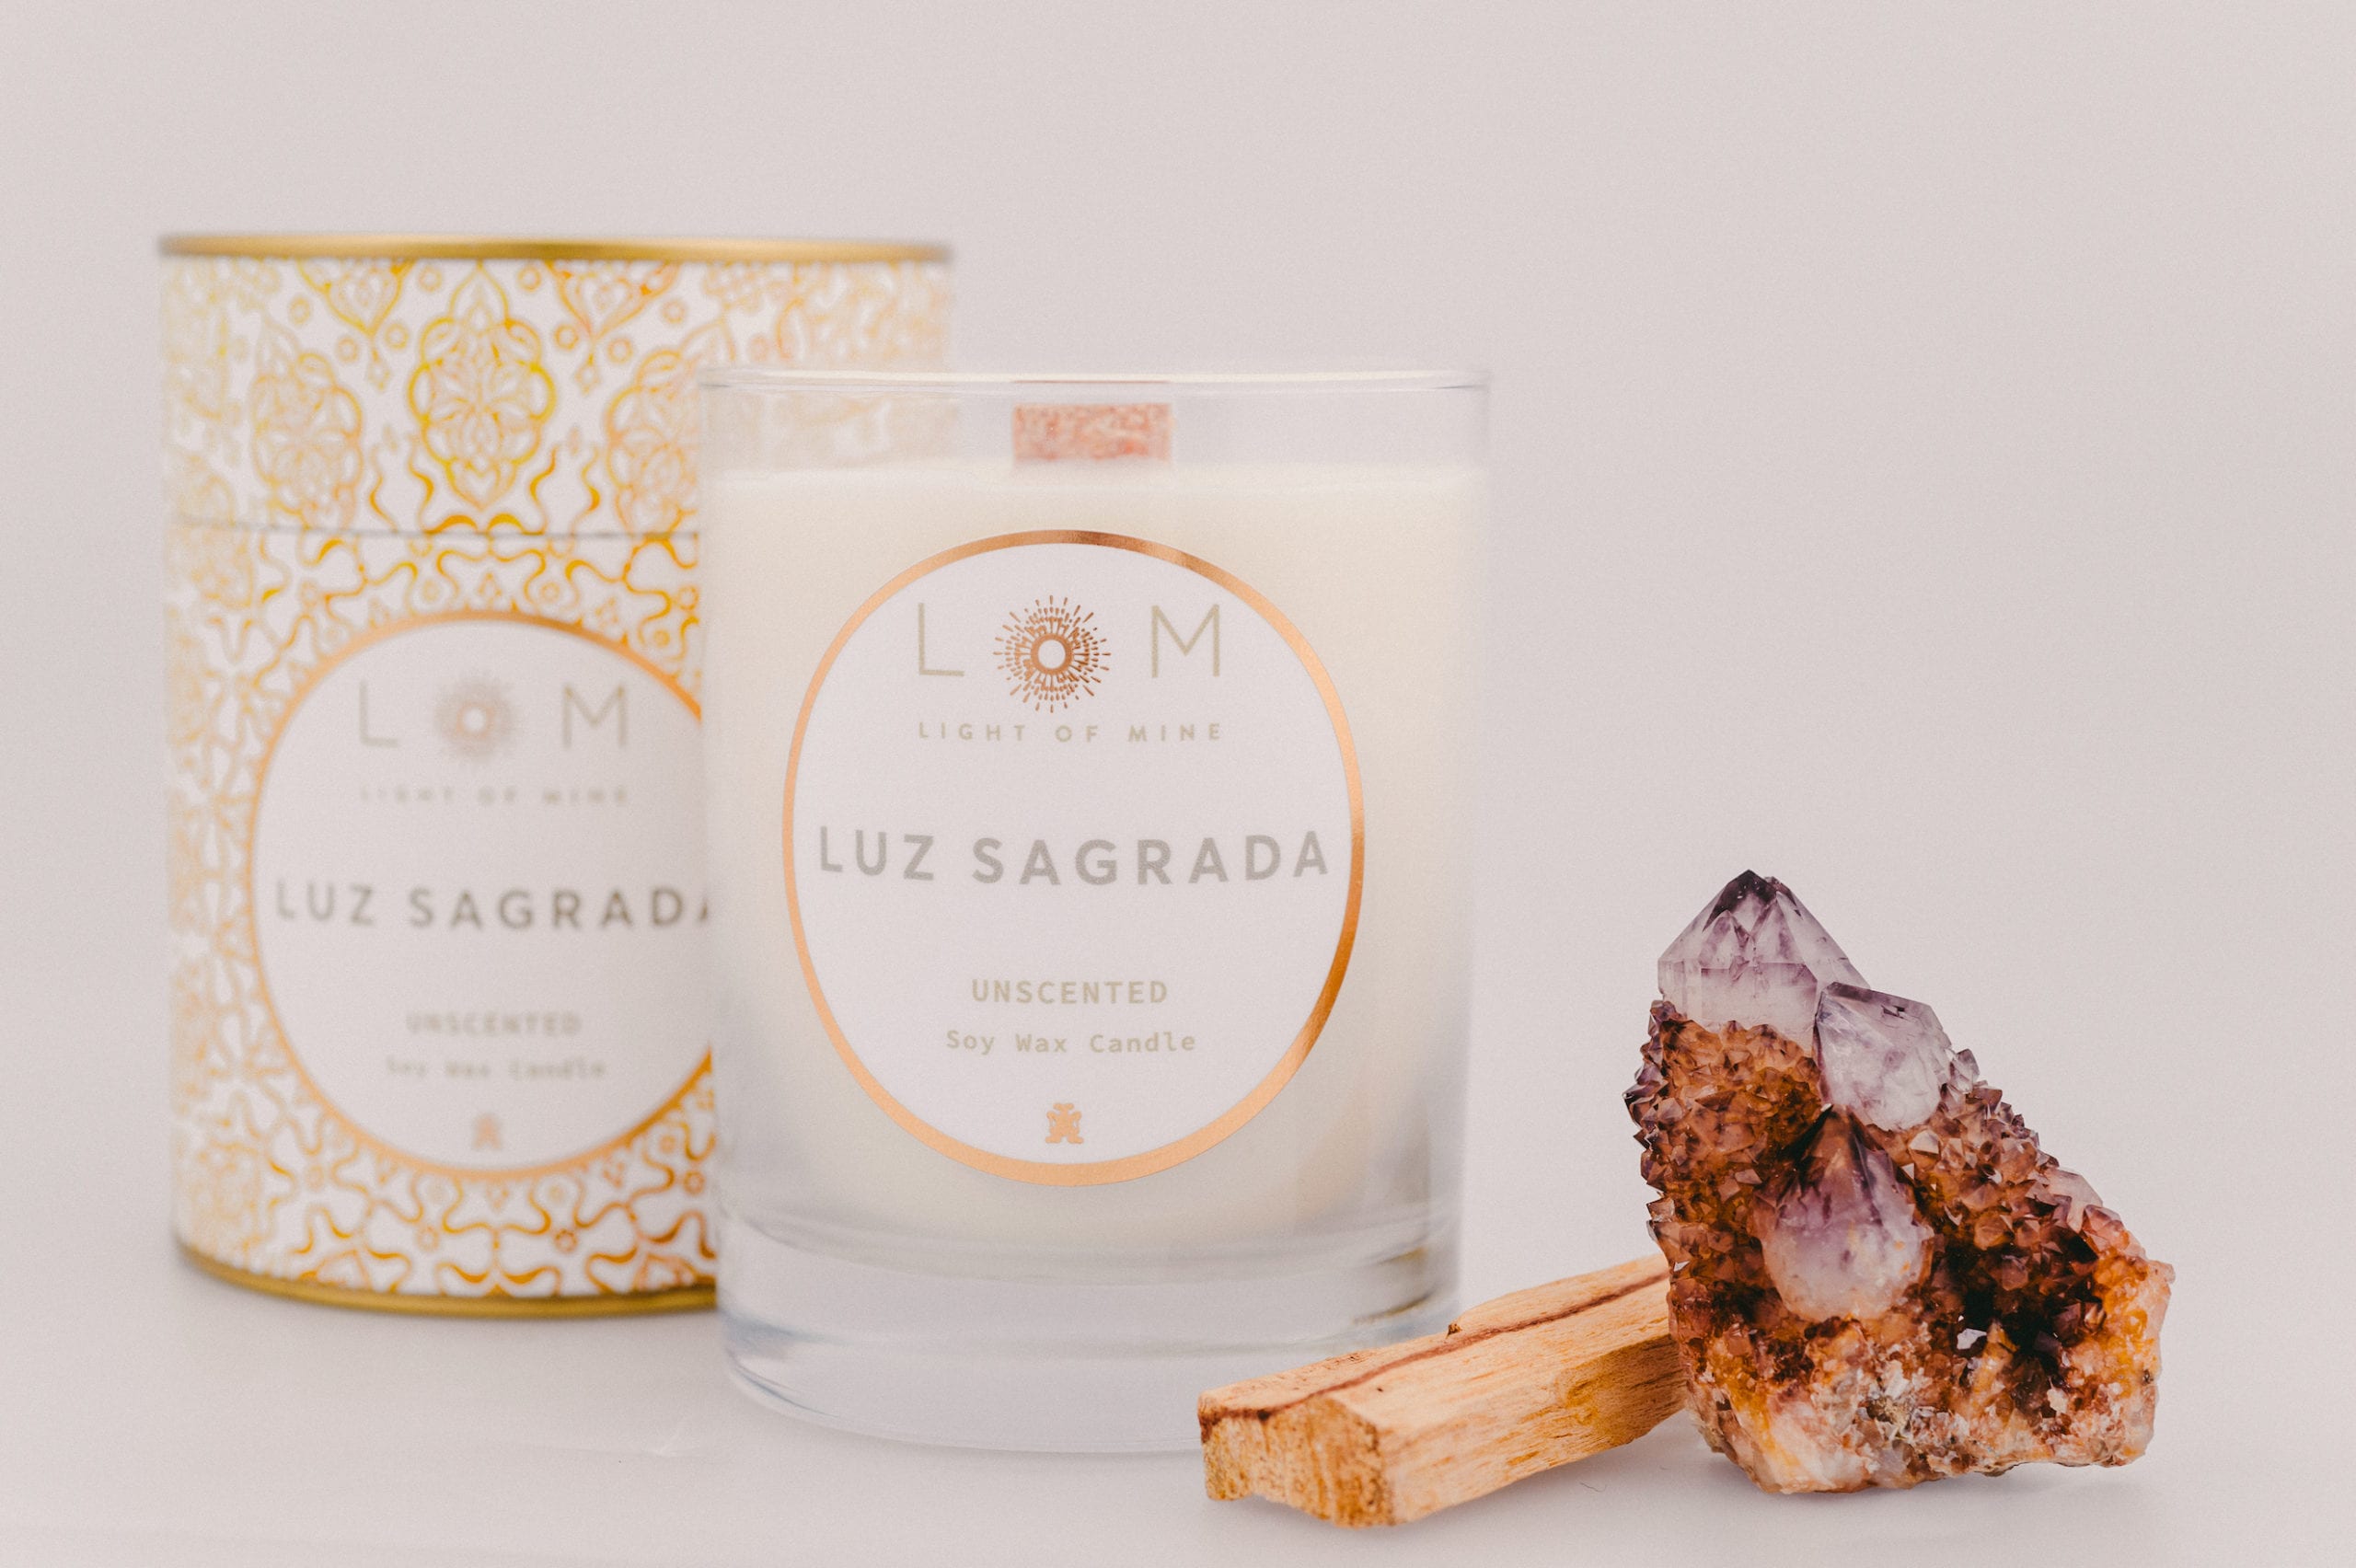 Two Light of Mine Luz Sagrada brand unscented soy wax candles next to a piece of wood and large quartz stone